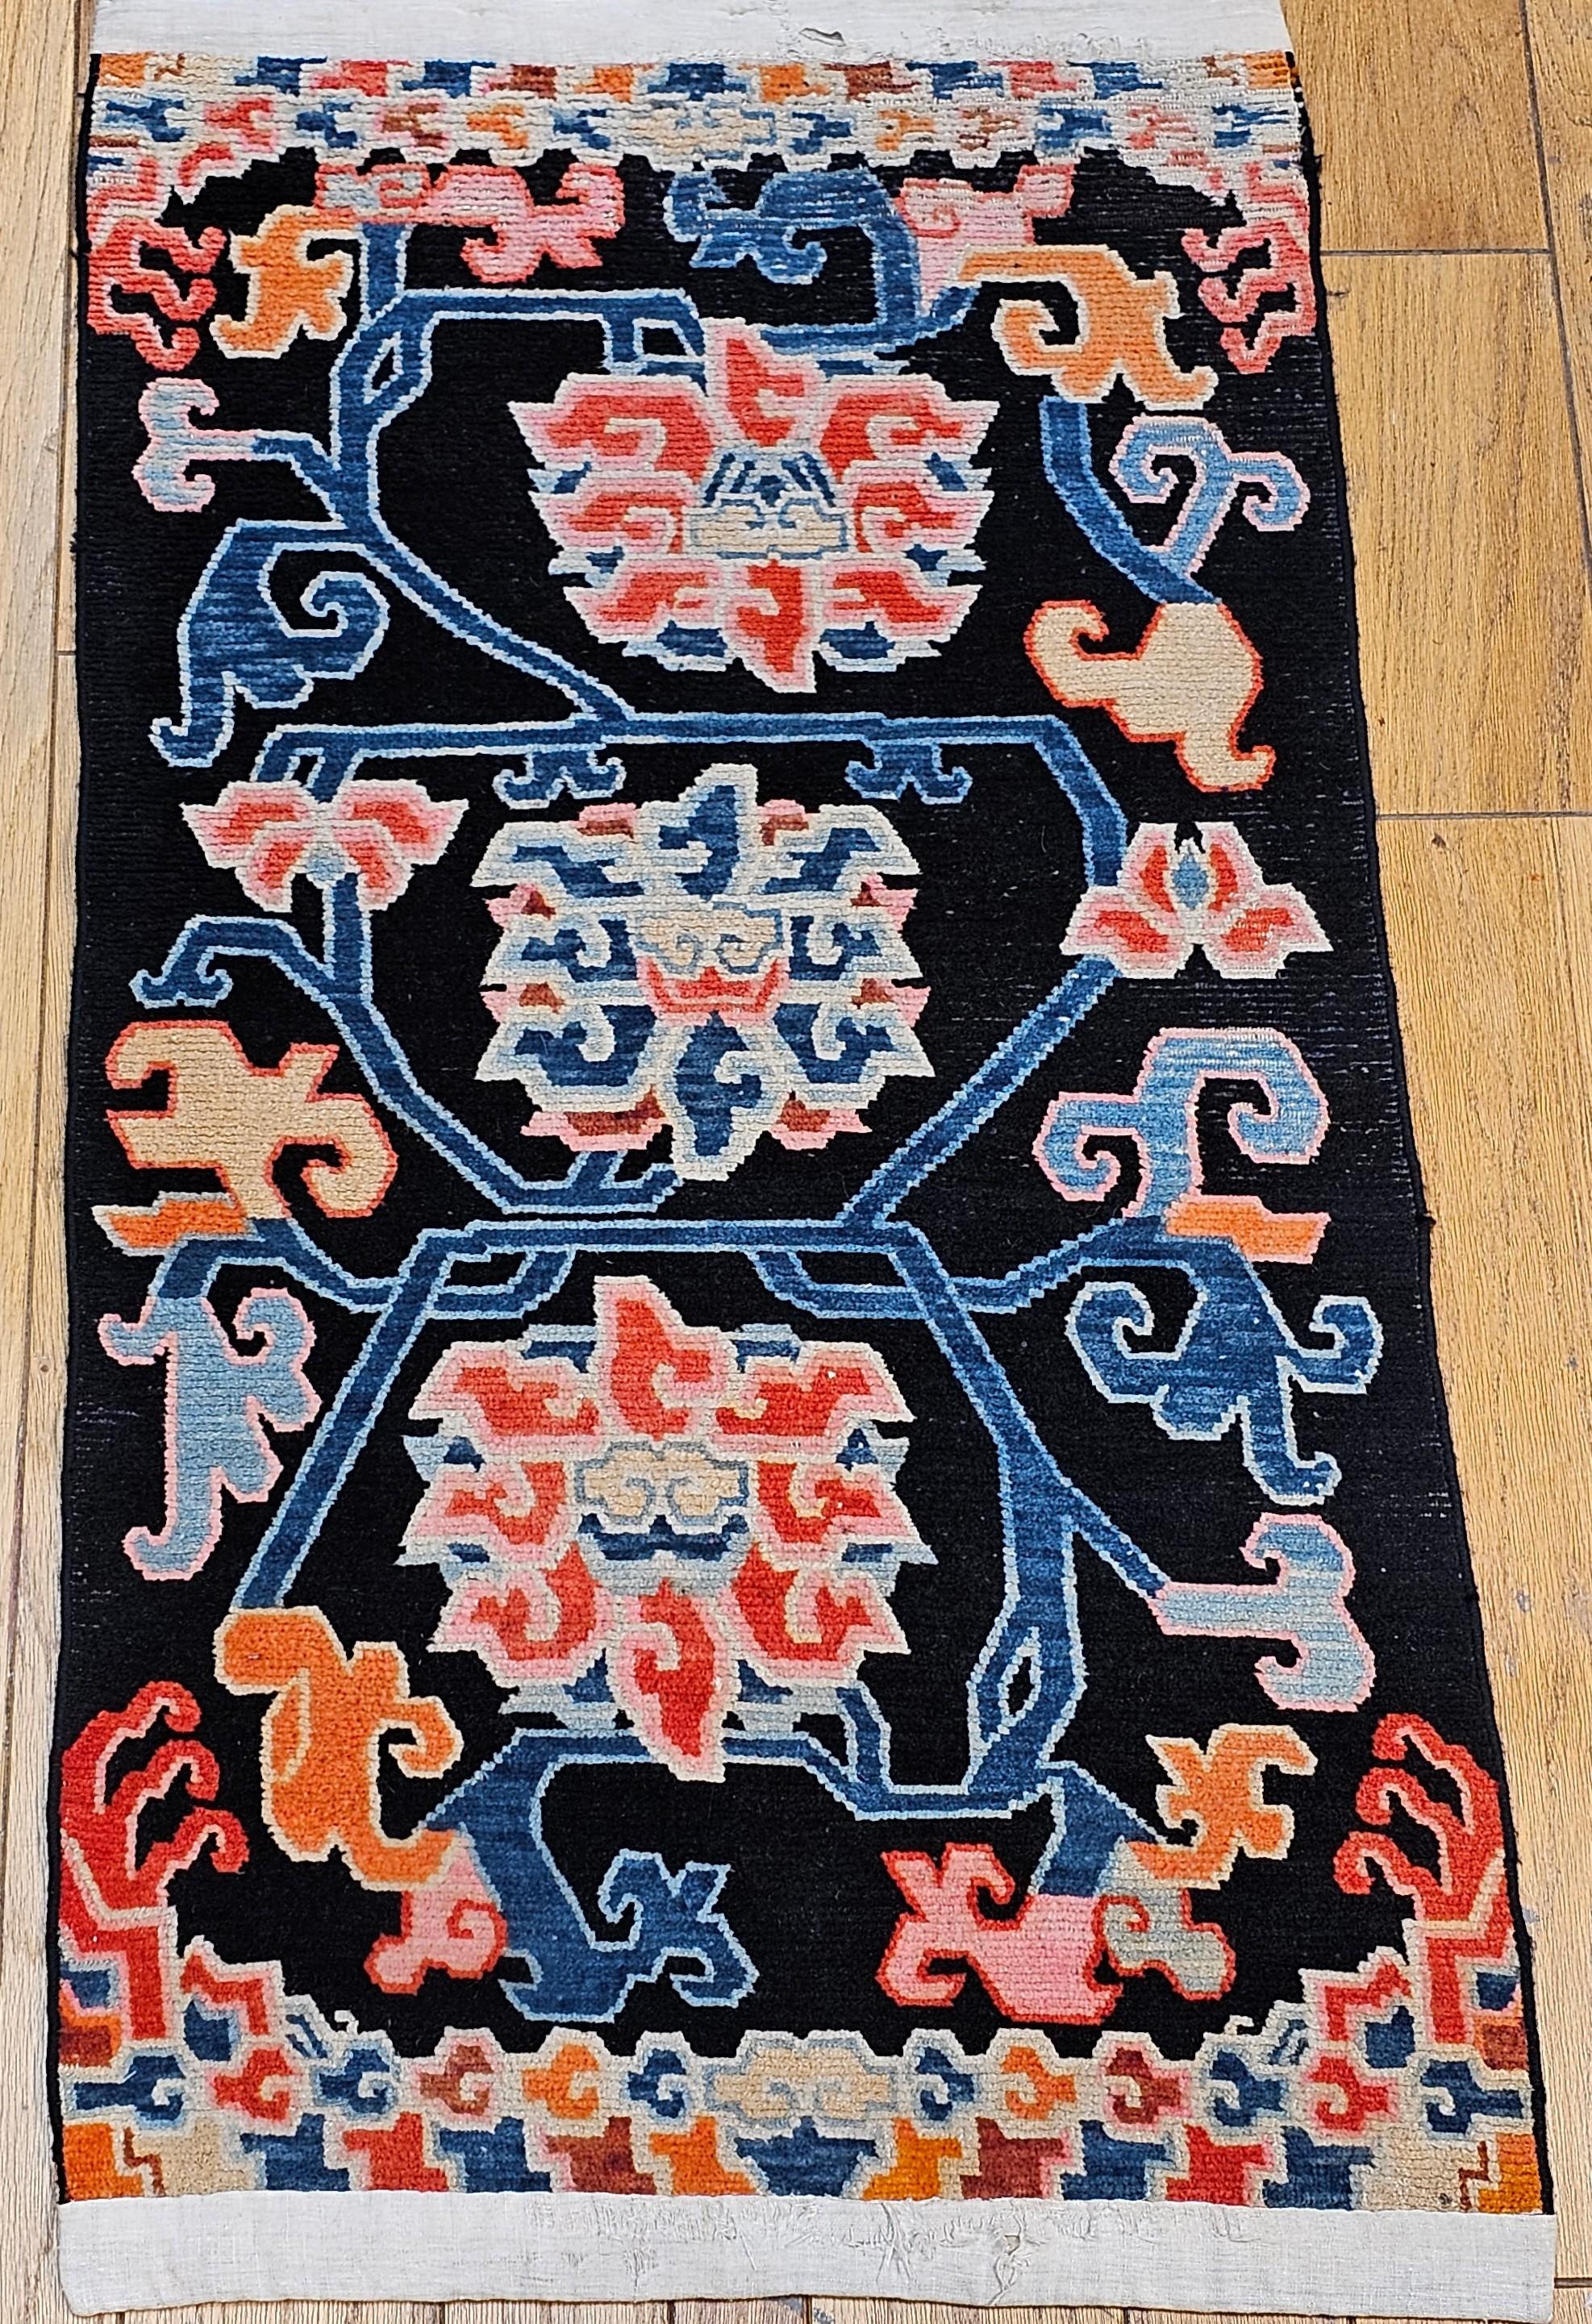 Vintage Tibetan Rug with Lotus Flowers and Cloud Symbols in French Blue and Red from the early 1900s.  Its field is designed with three large-scale Lotus flowers with protruding vines set on a black background color which creates color contrast